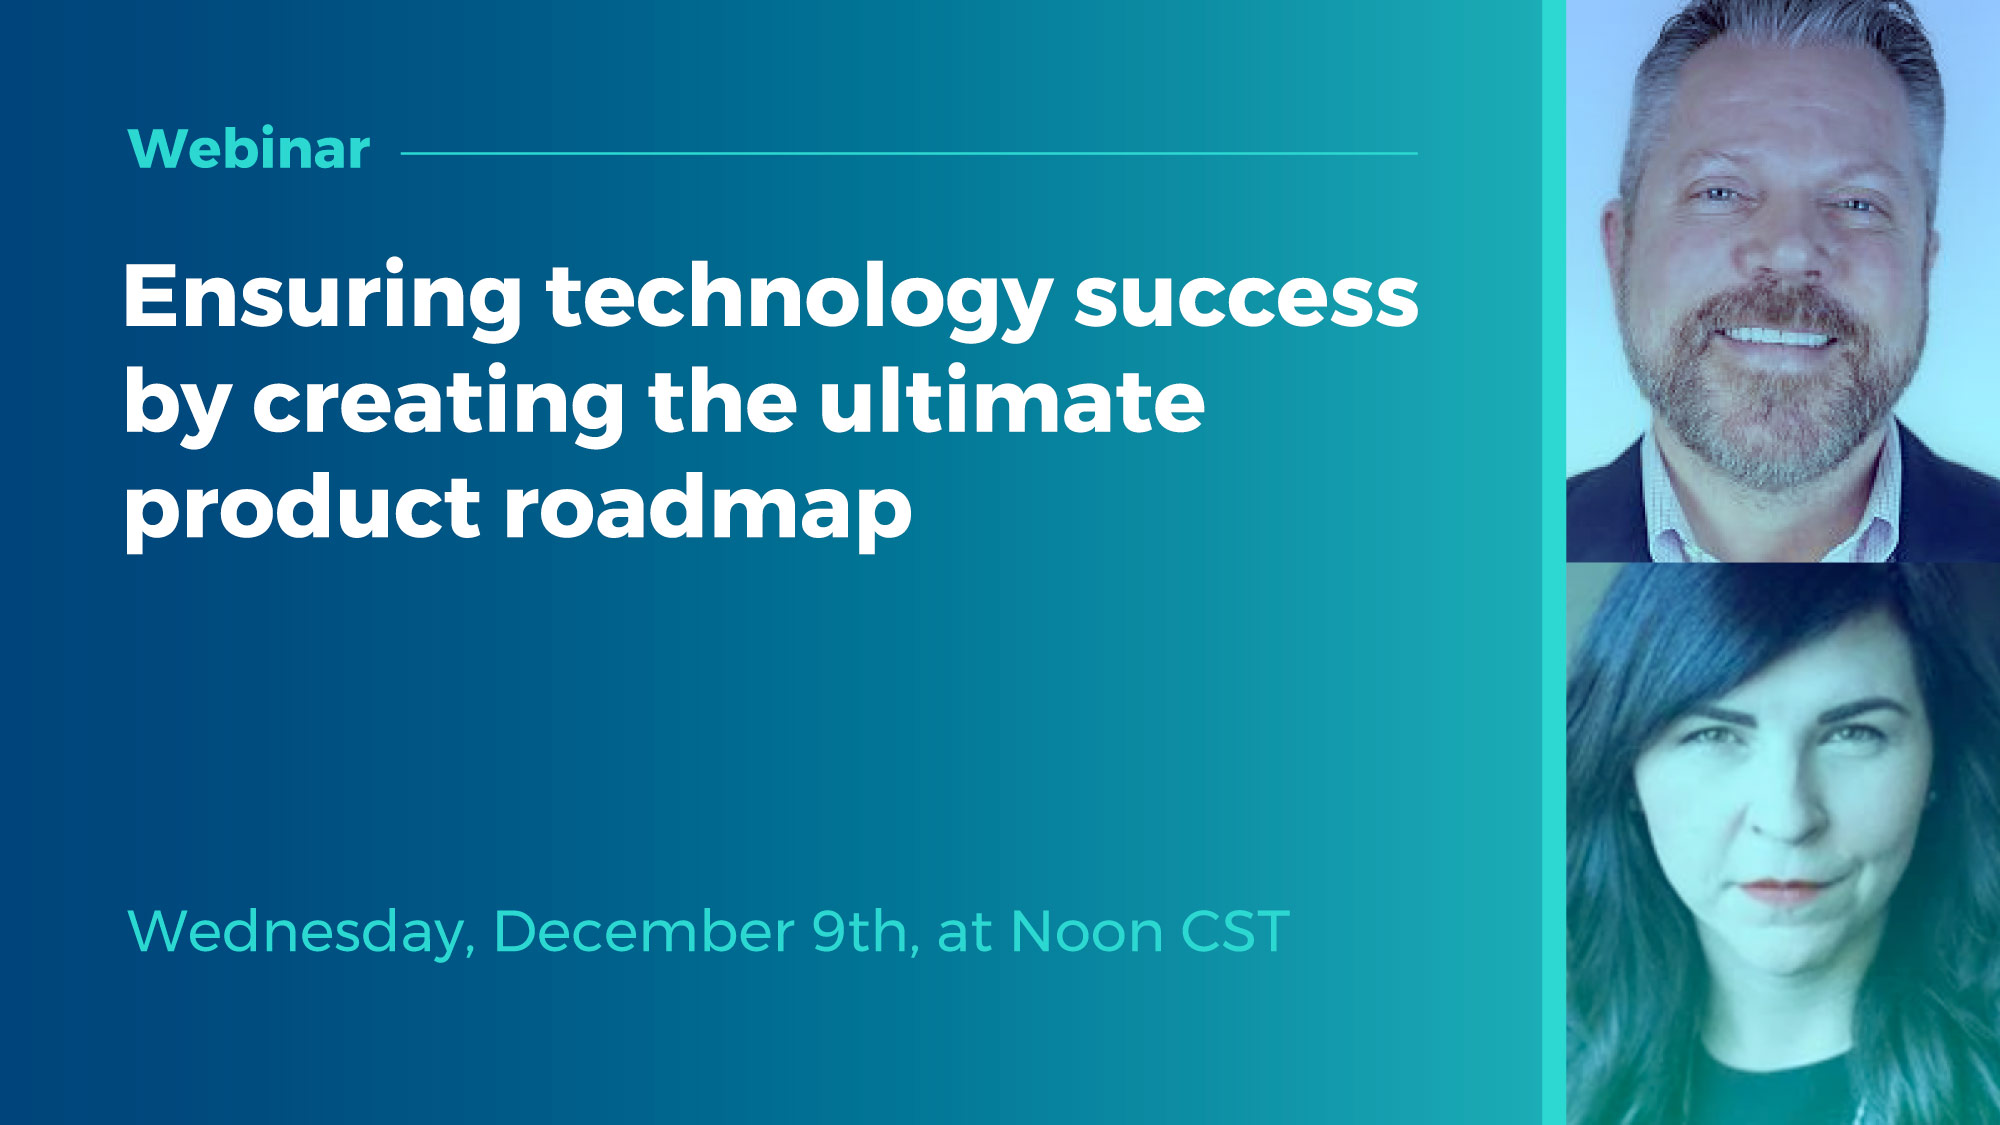  Ensuring technology success by creating the ultimate product roadmap [Webinar]